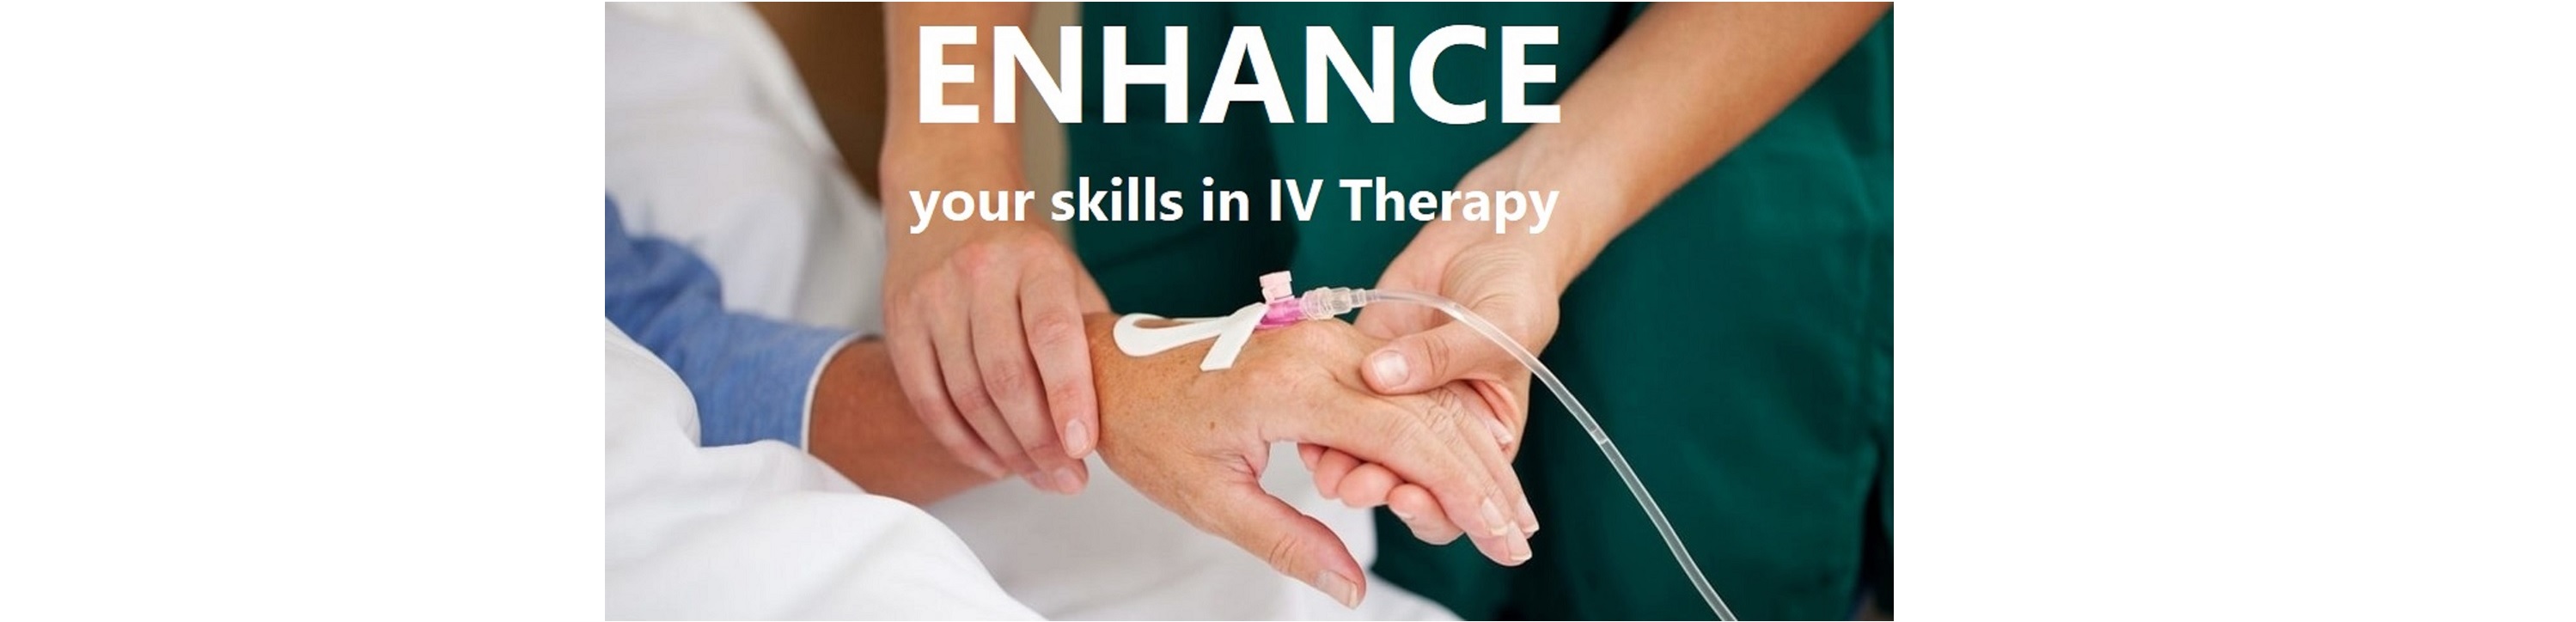 IV Therapy Course - CAMDEN - Saturday, October 5, 2019 Banner